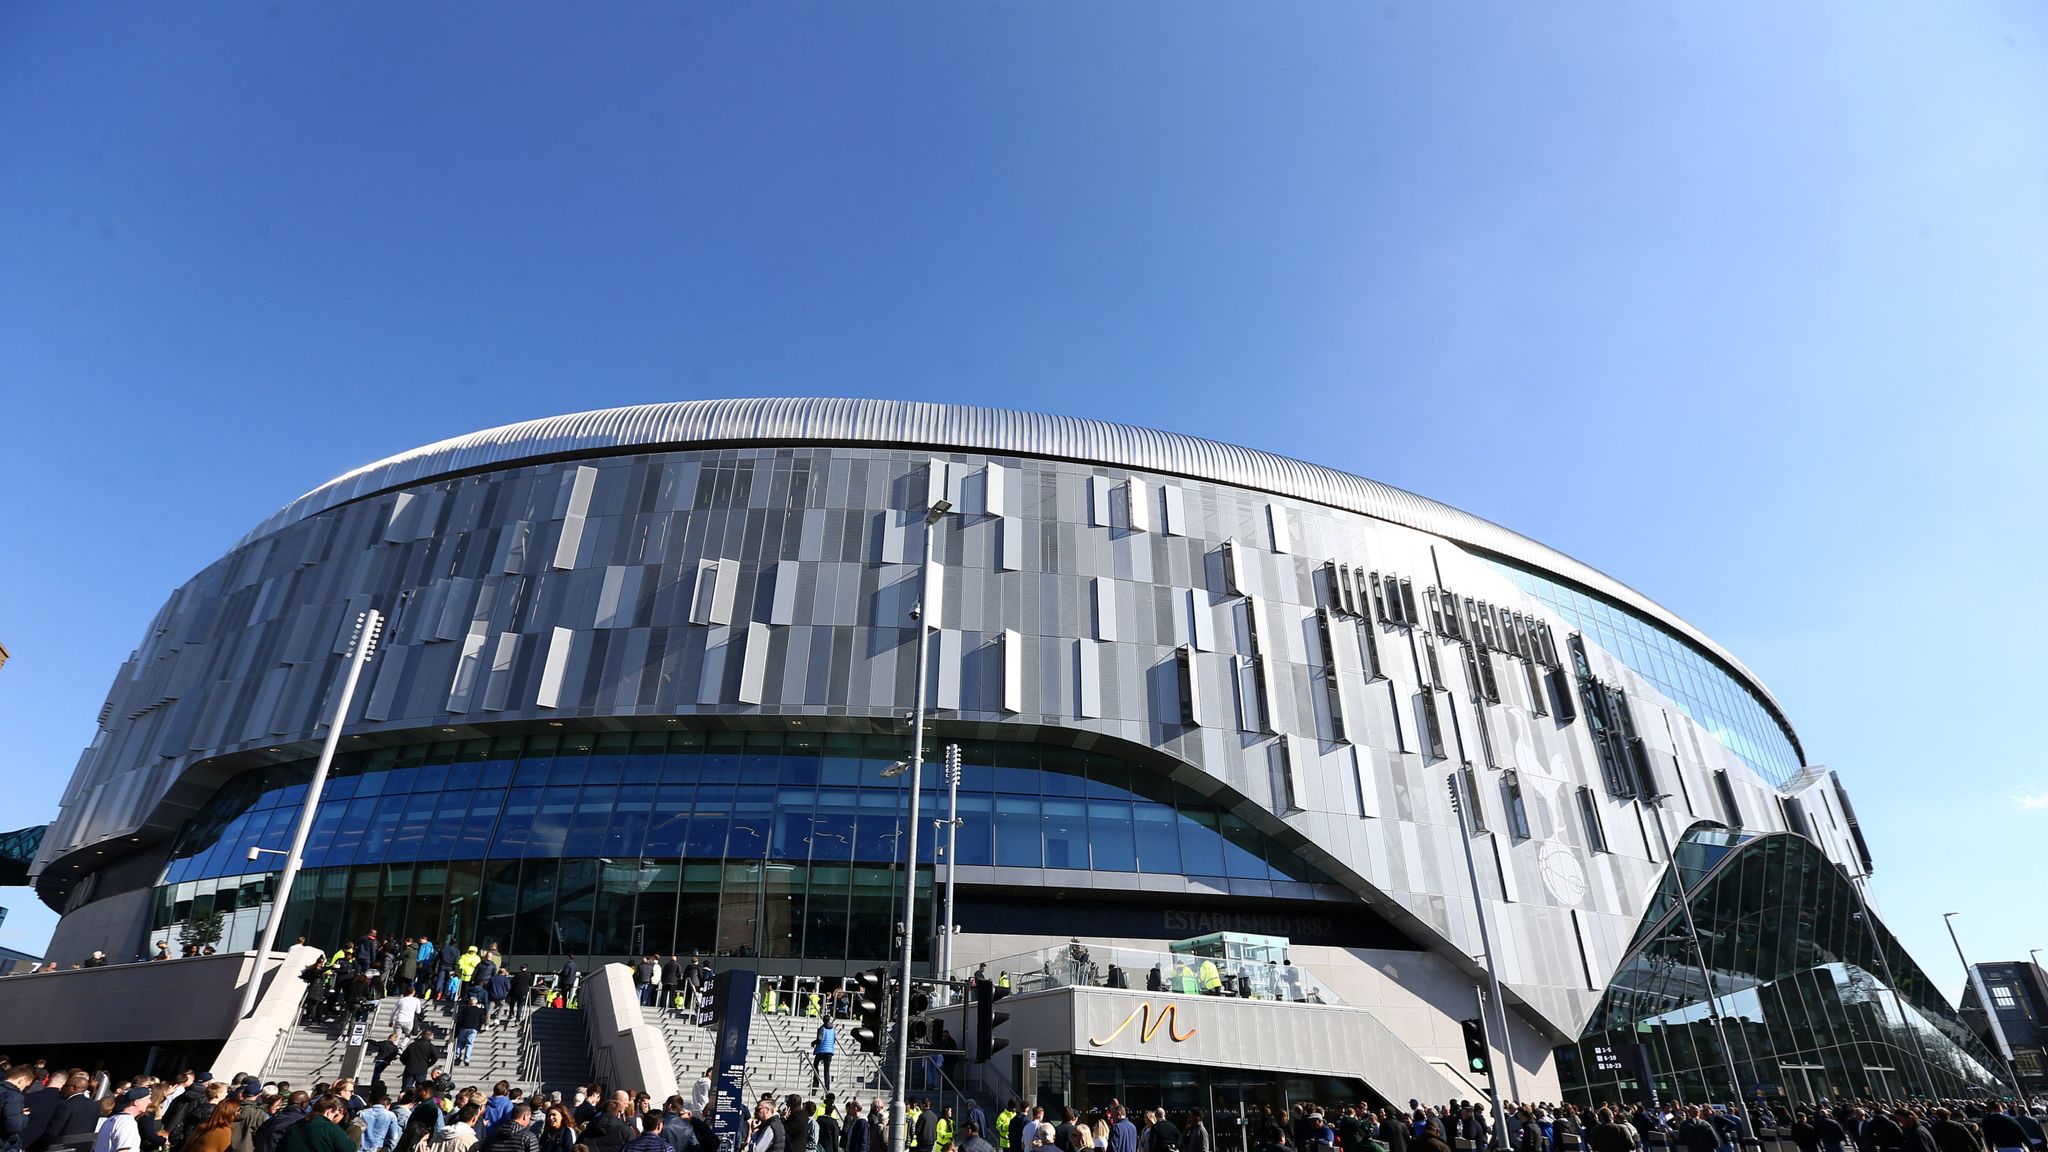 Tottenham'S New Stadium: All You Need To Know About Spurs' New £1Billion  Ground | Football News | Sky Sports